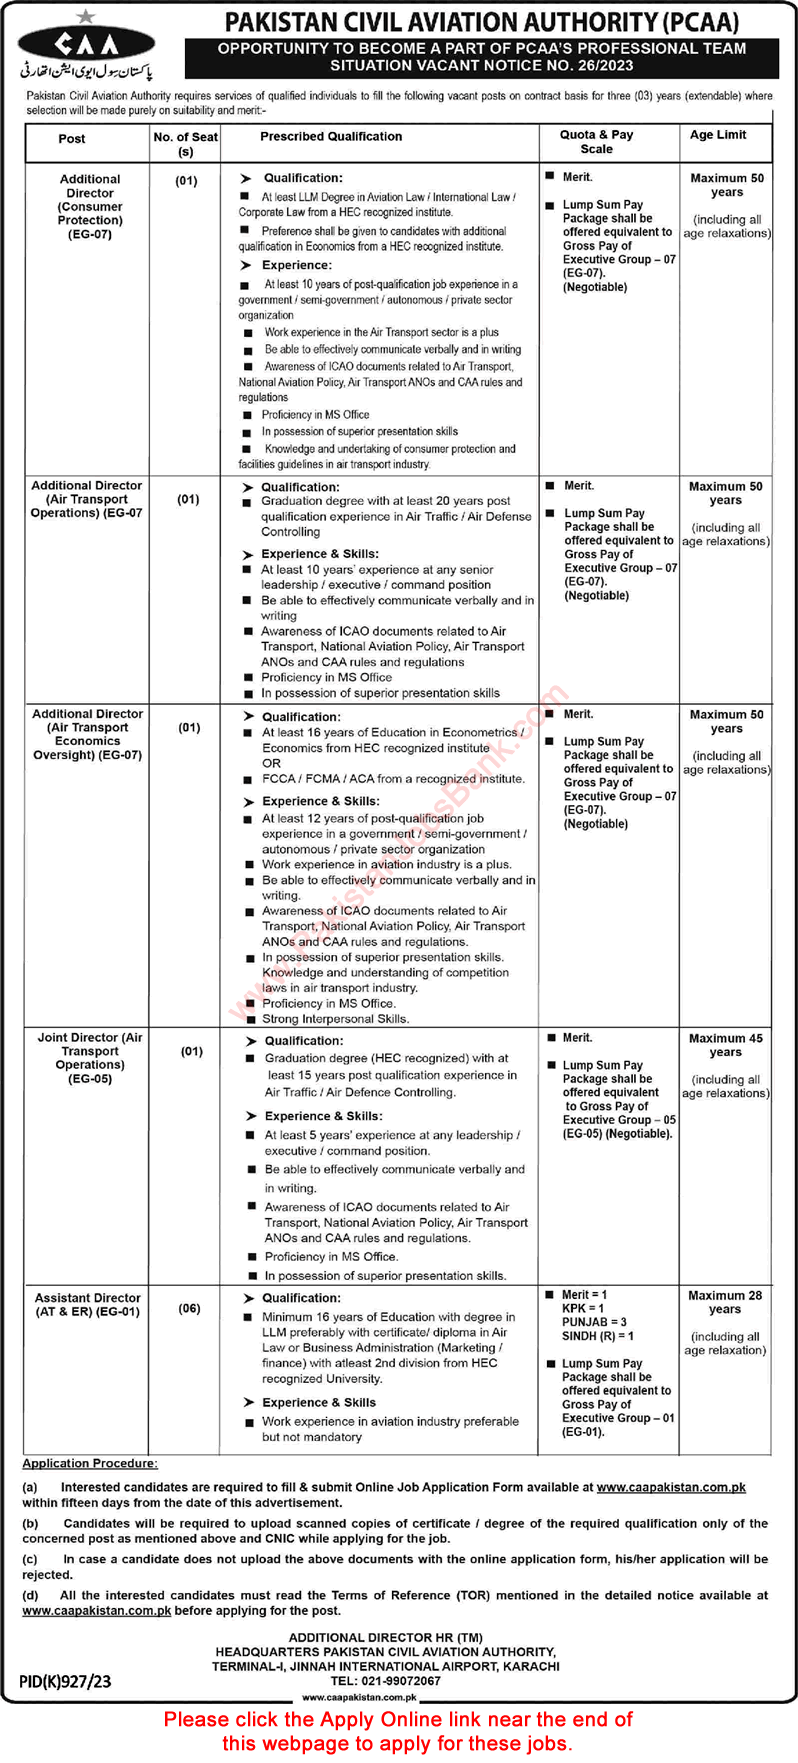 Pakistan Civil Aviation Authority Jobs September 2023 PCAA Apply Online Additional / Assistant Director & Others Latest